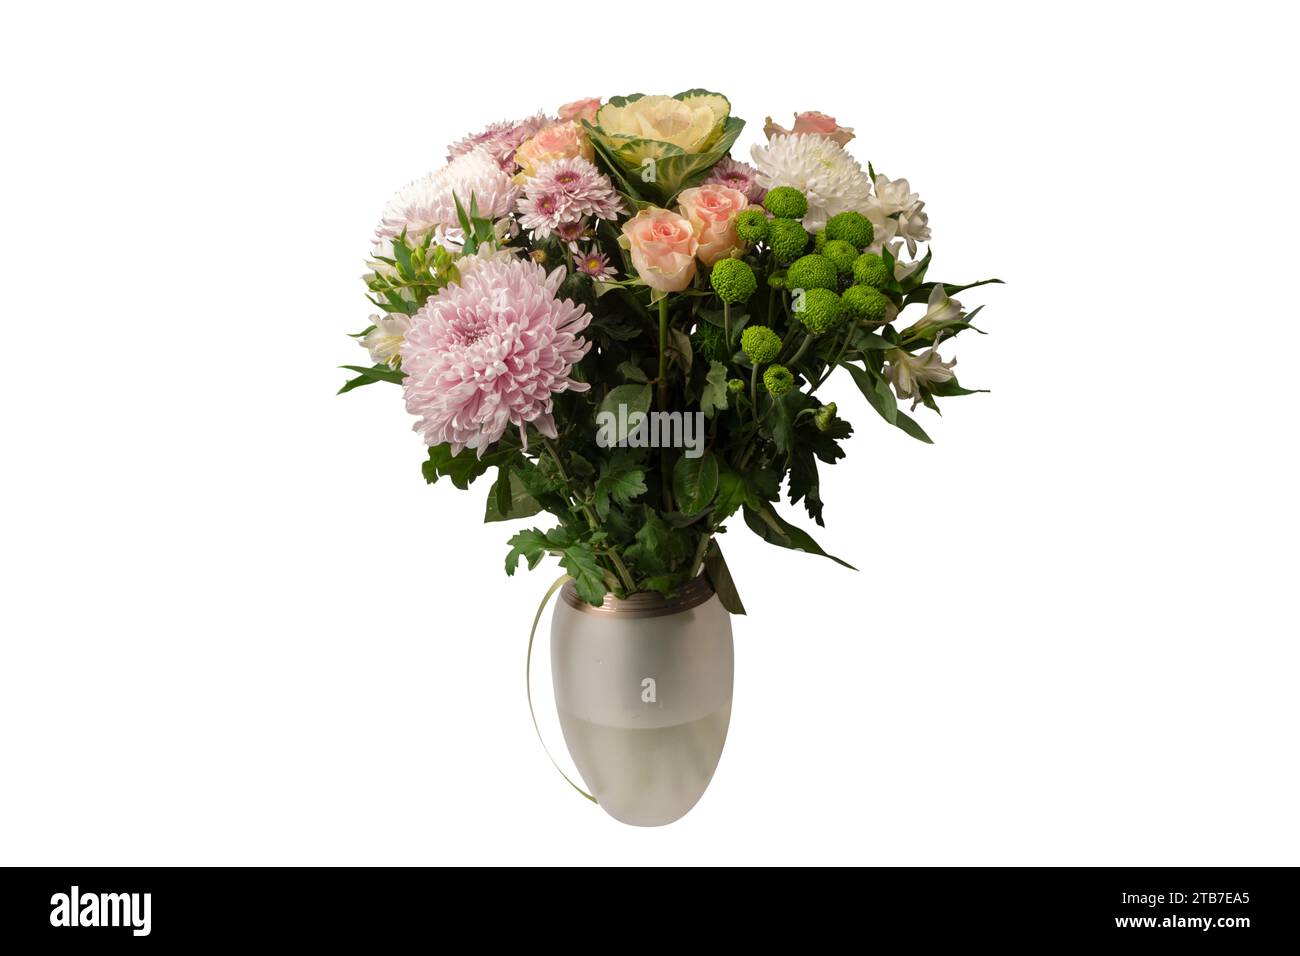 Bouquet of flowers with pink roses, brassica flower, chrysanthemum and freesia flower in a vase isolated on a white background. Stock Photo